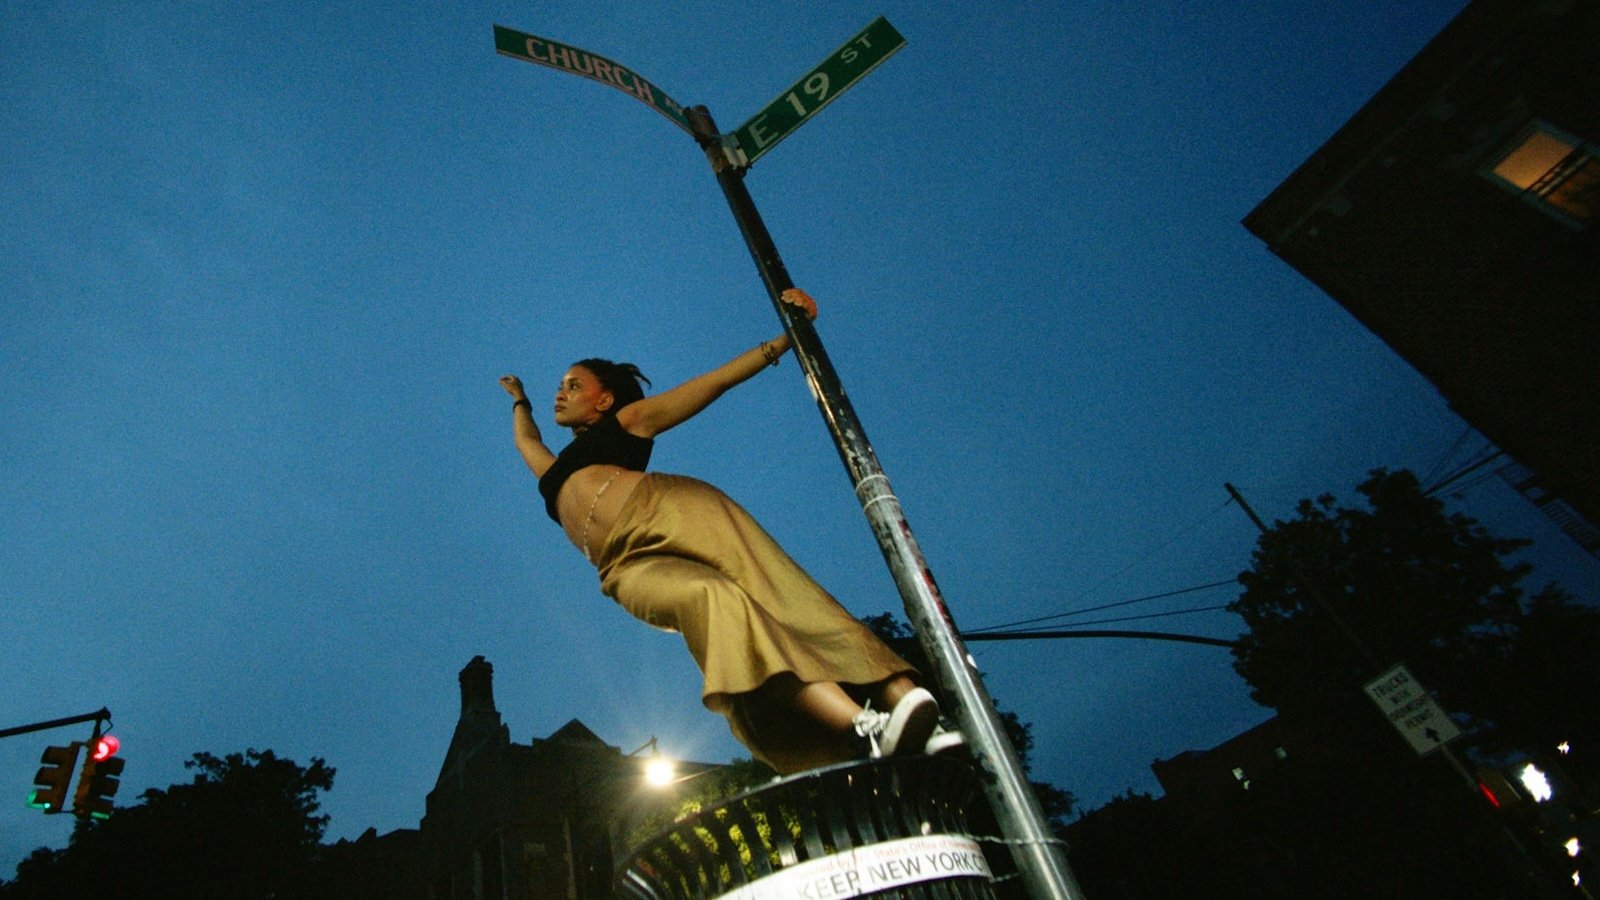 A young woman bearing her midriff stands on a garbage can and grasping a New York city street sign, with one arm out